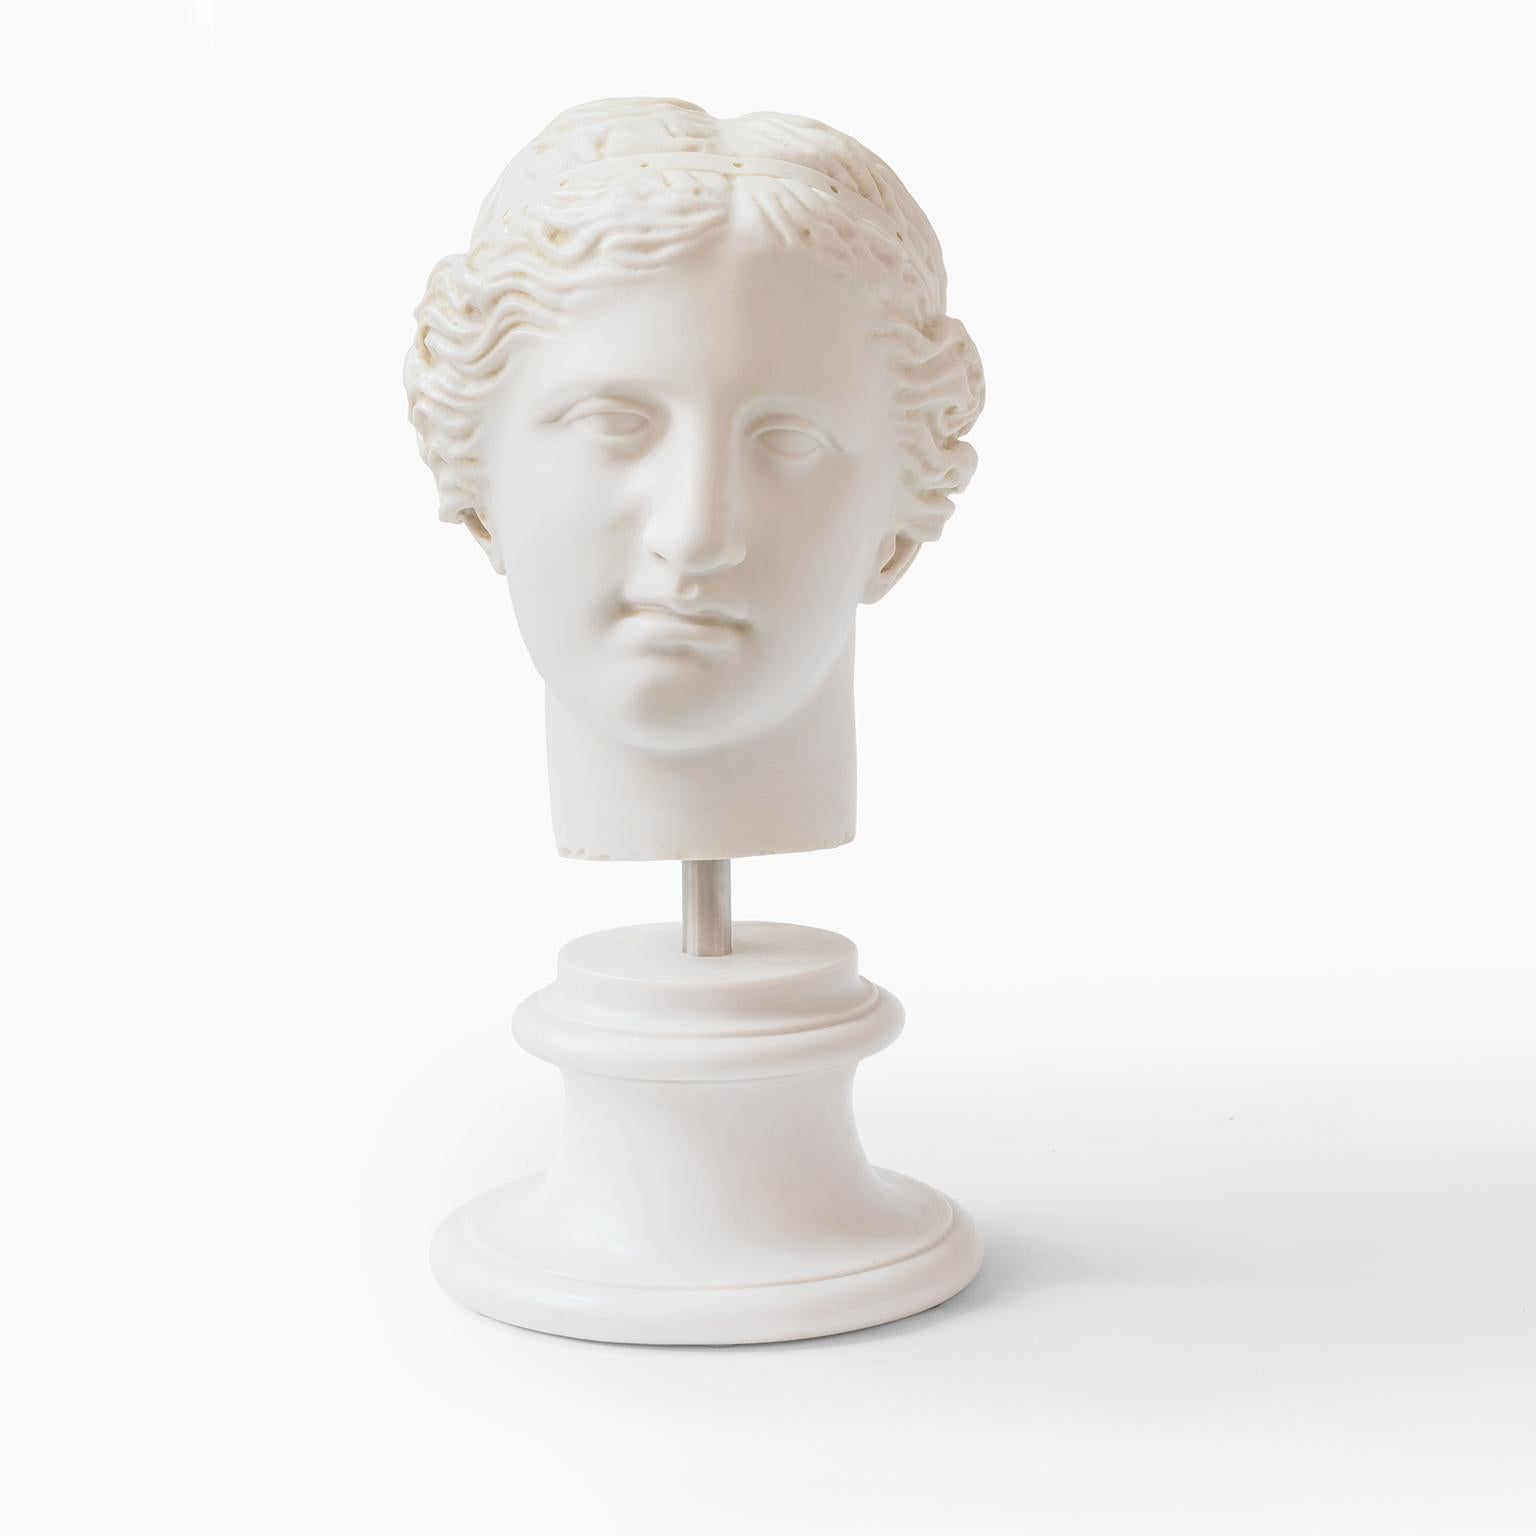 Statuary Marble Aphrodite Bust  Statue Made with Compressed Marble Powder, 'Louvre Museum' For Sale